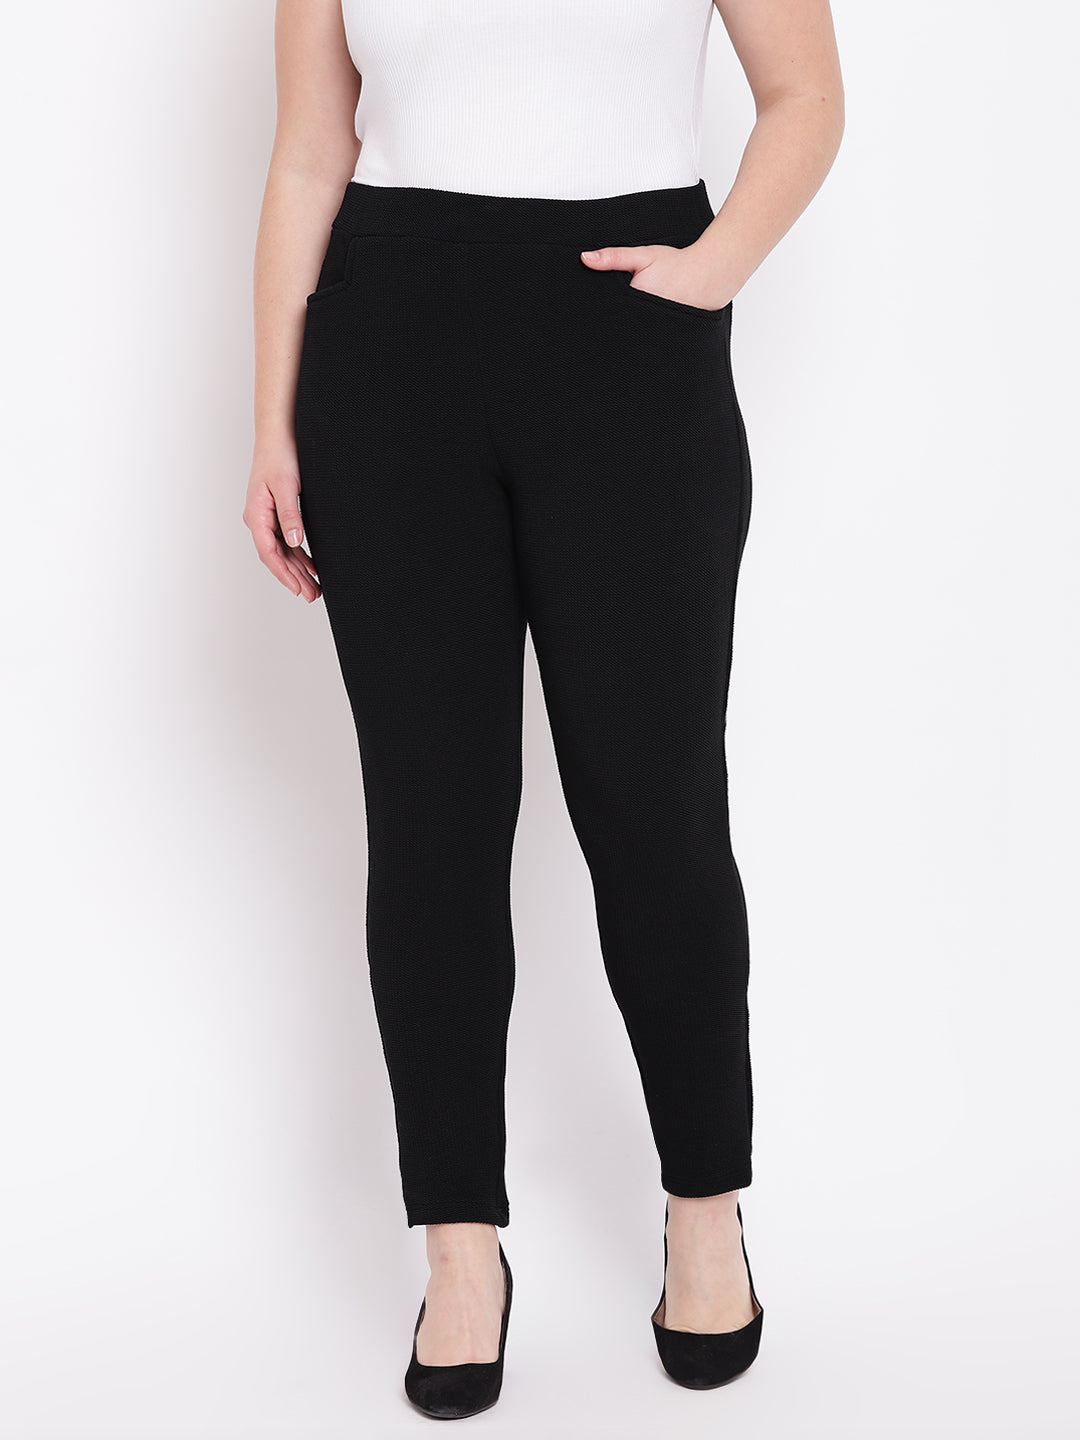 Plus Size black regular fit self design trousers For Women L to